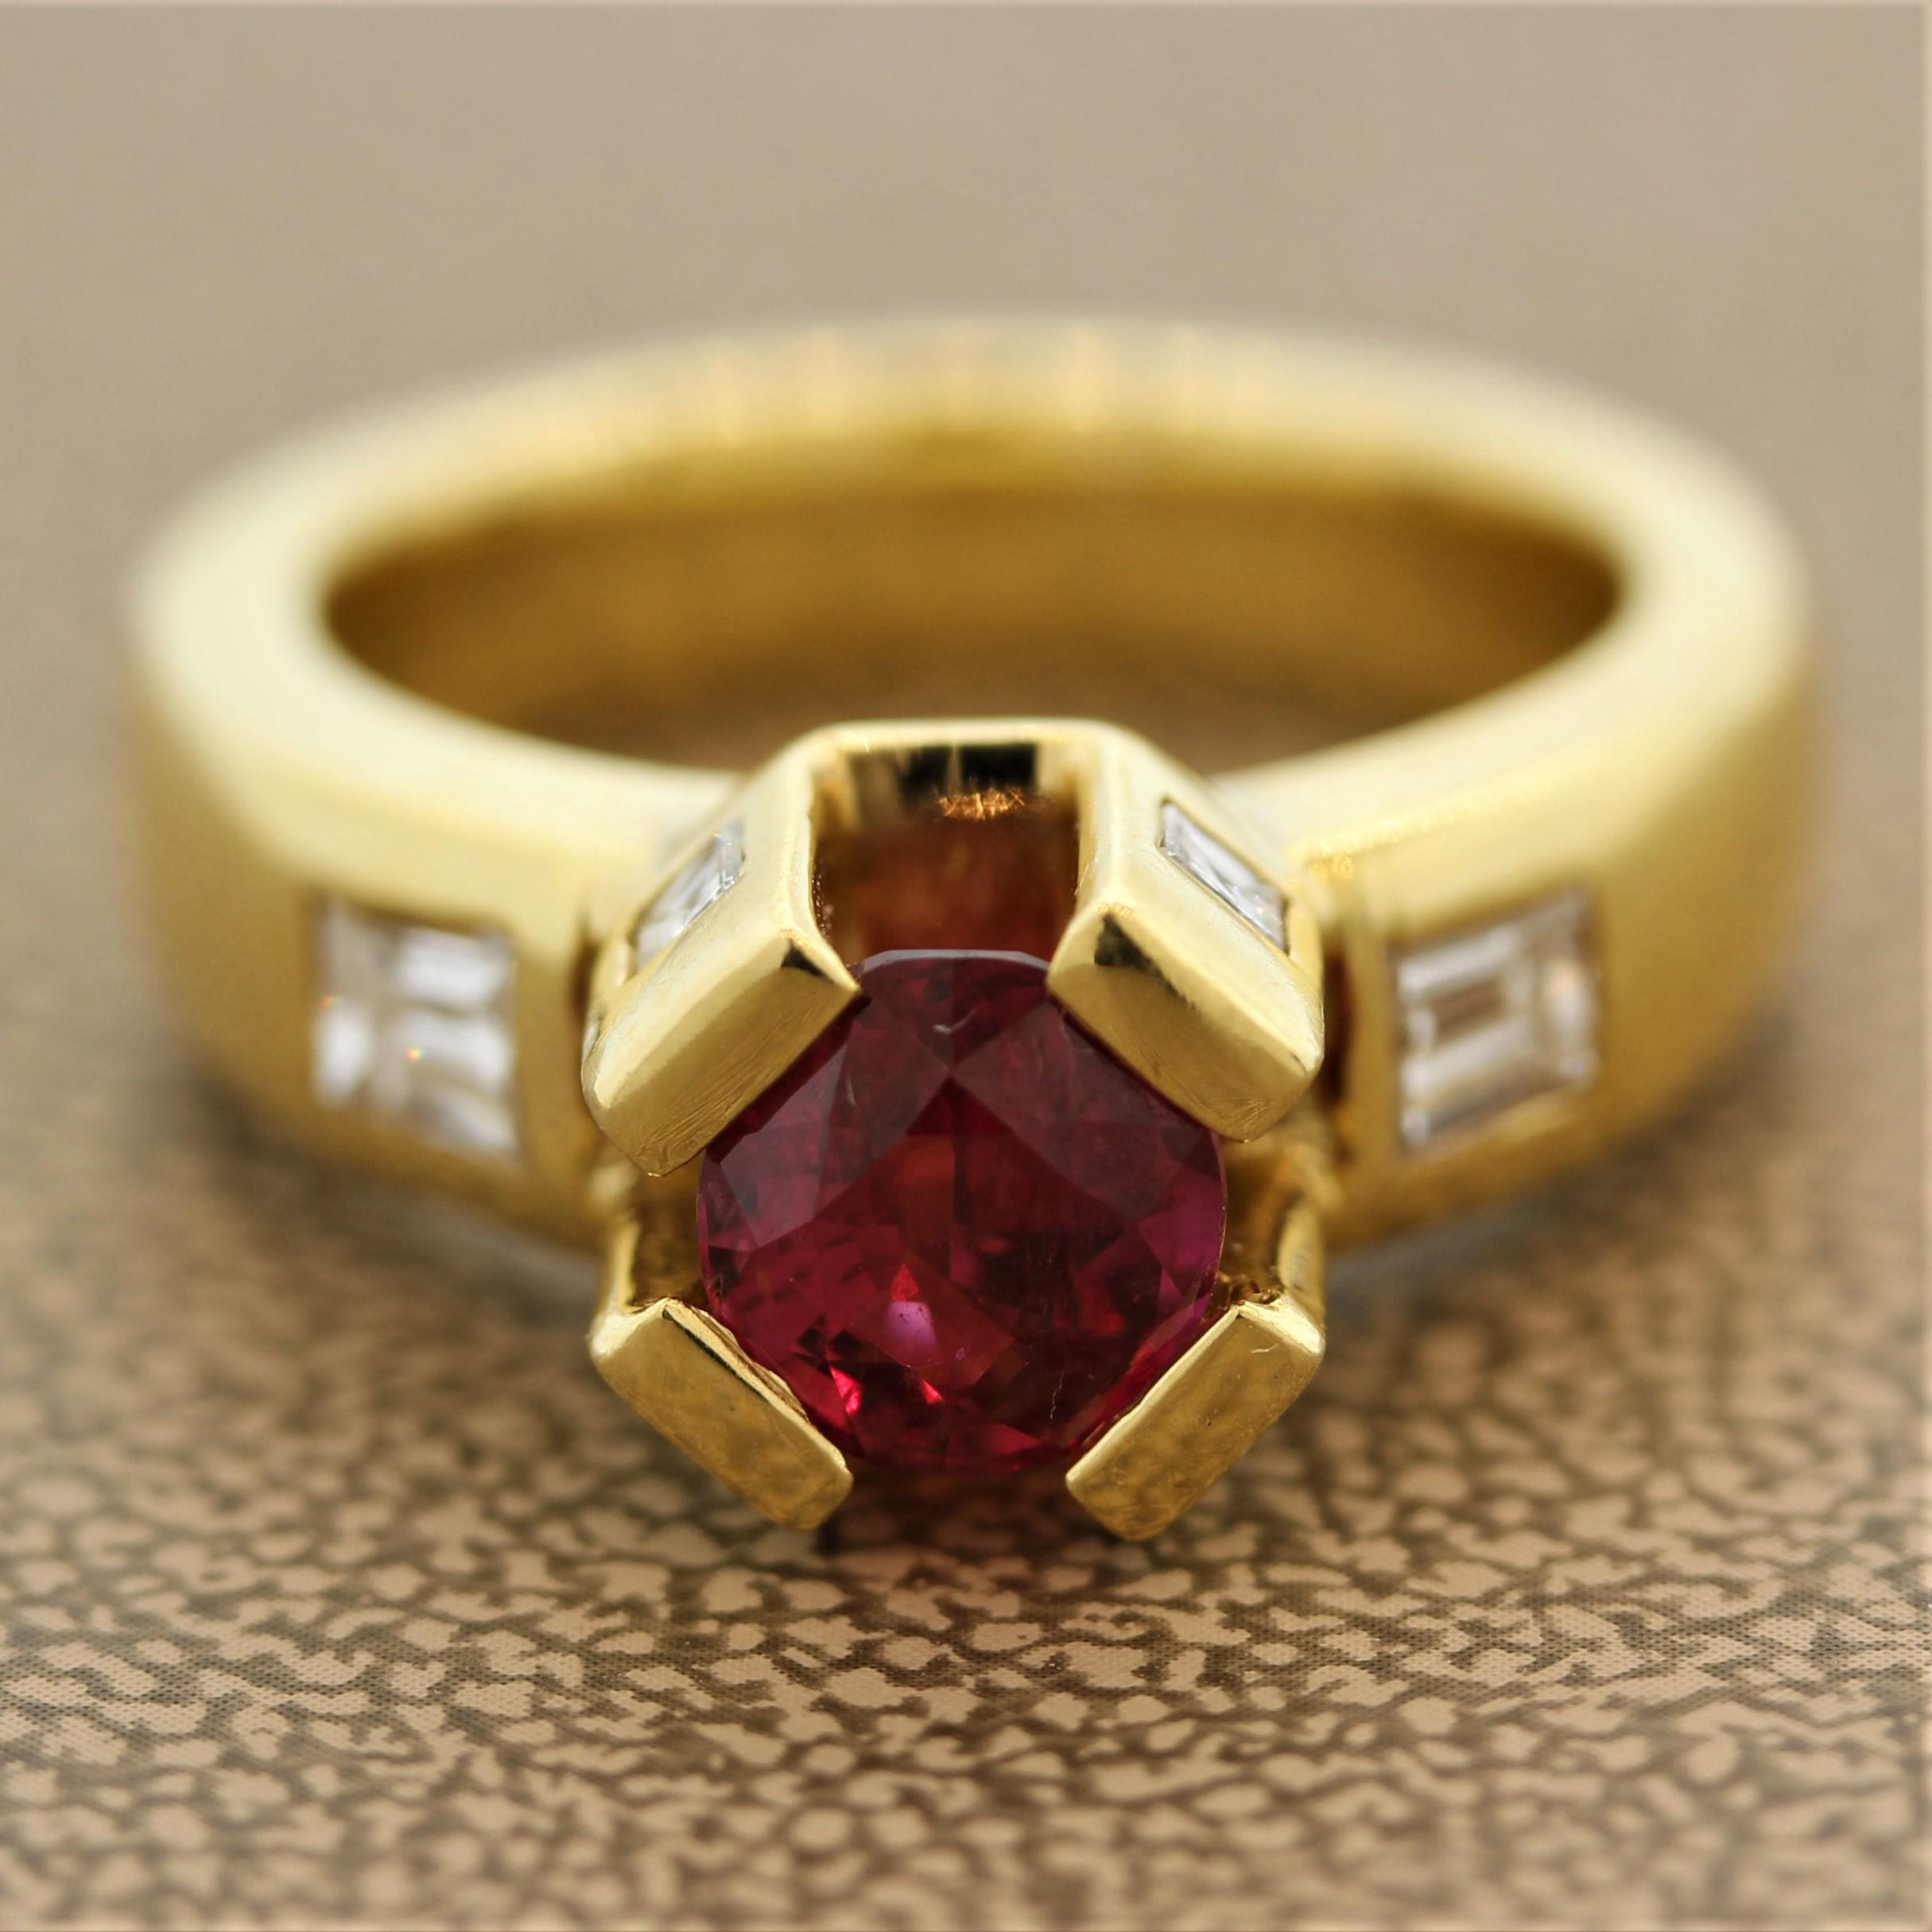 A royal ruby ring! It features a round cut ruby weighing 1.45 carats with a bright vivid red color. It is set in large and tall yellow gold prongs that resemble a crown. The ring is accented by 0.66 carats of baguette and square cut diamonds. Made